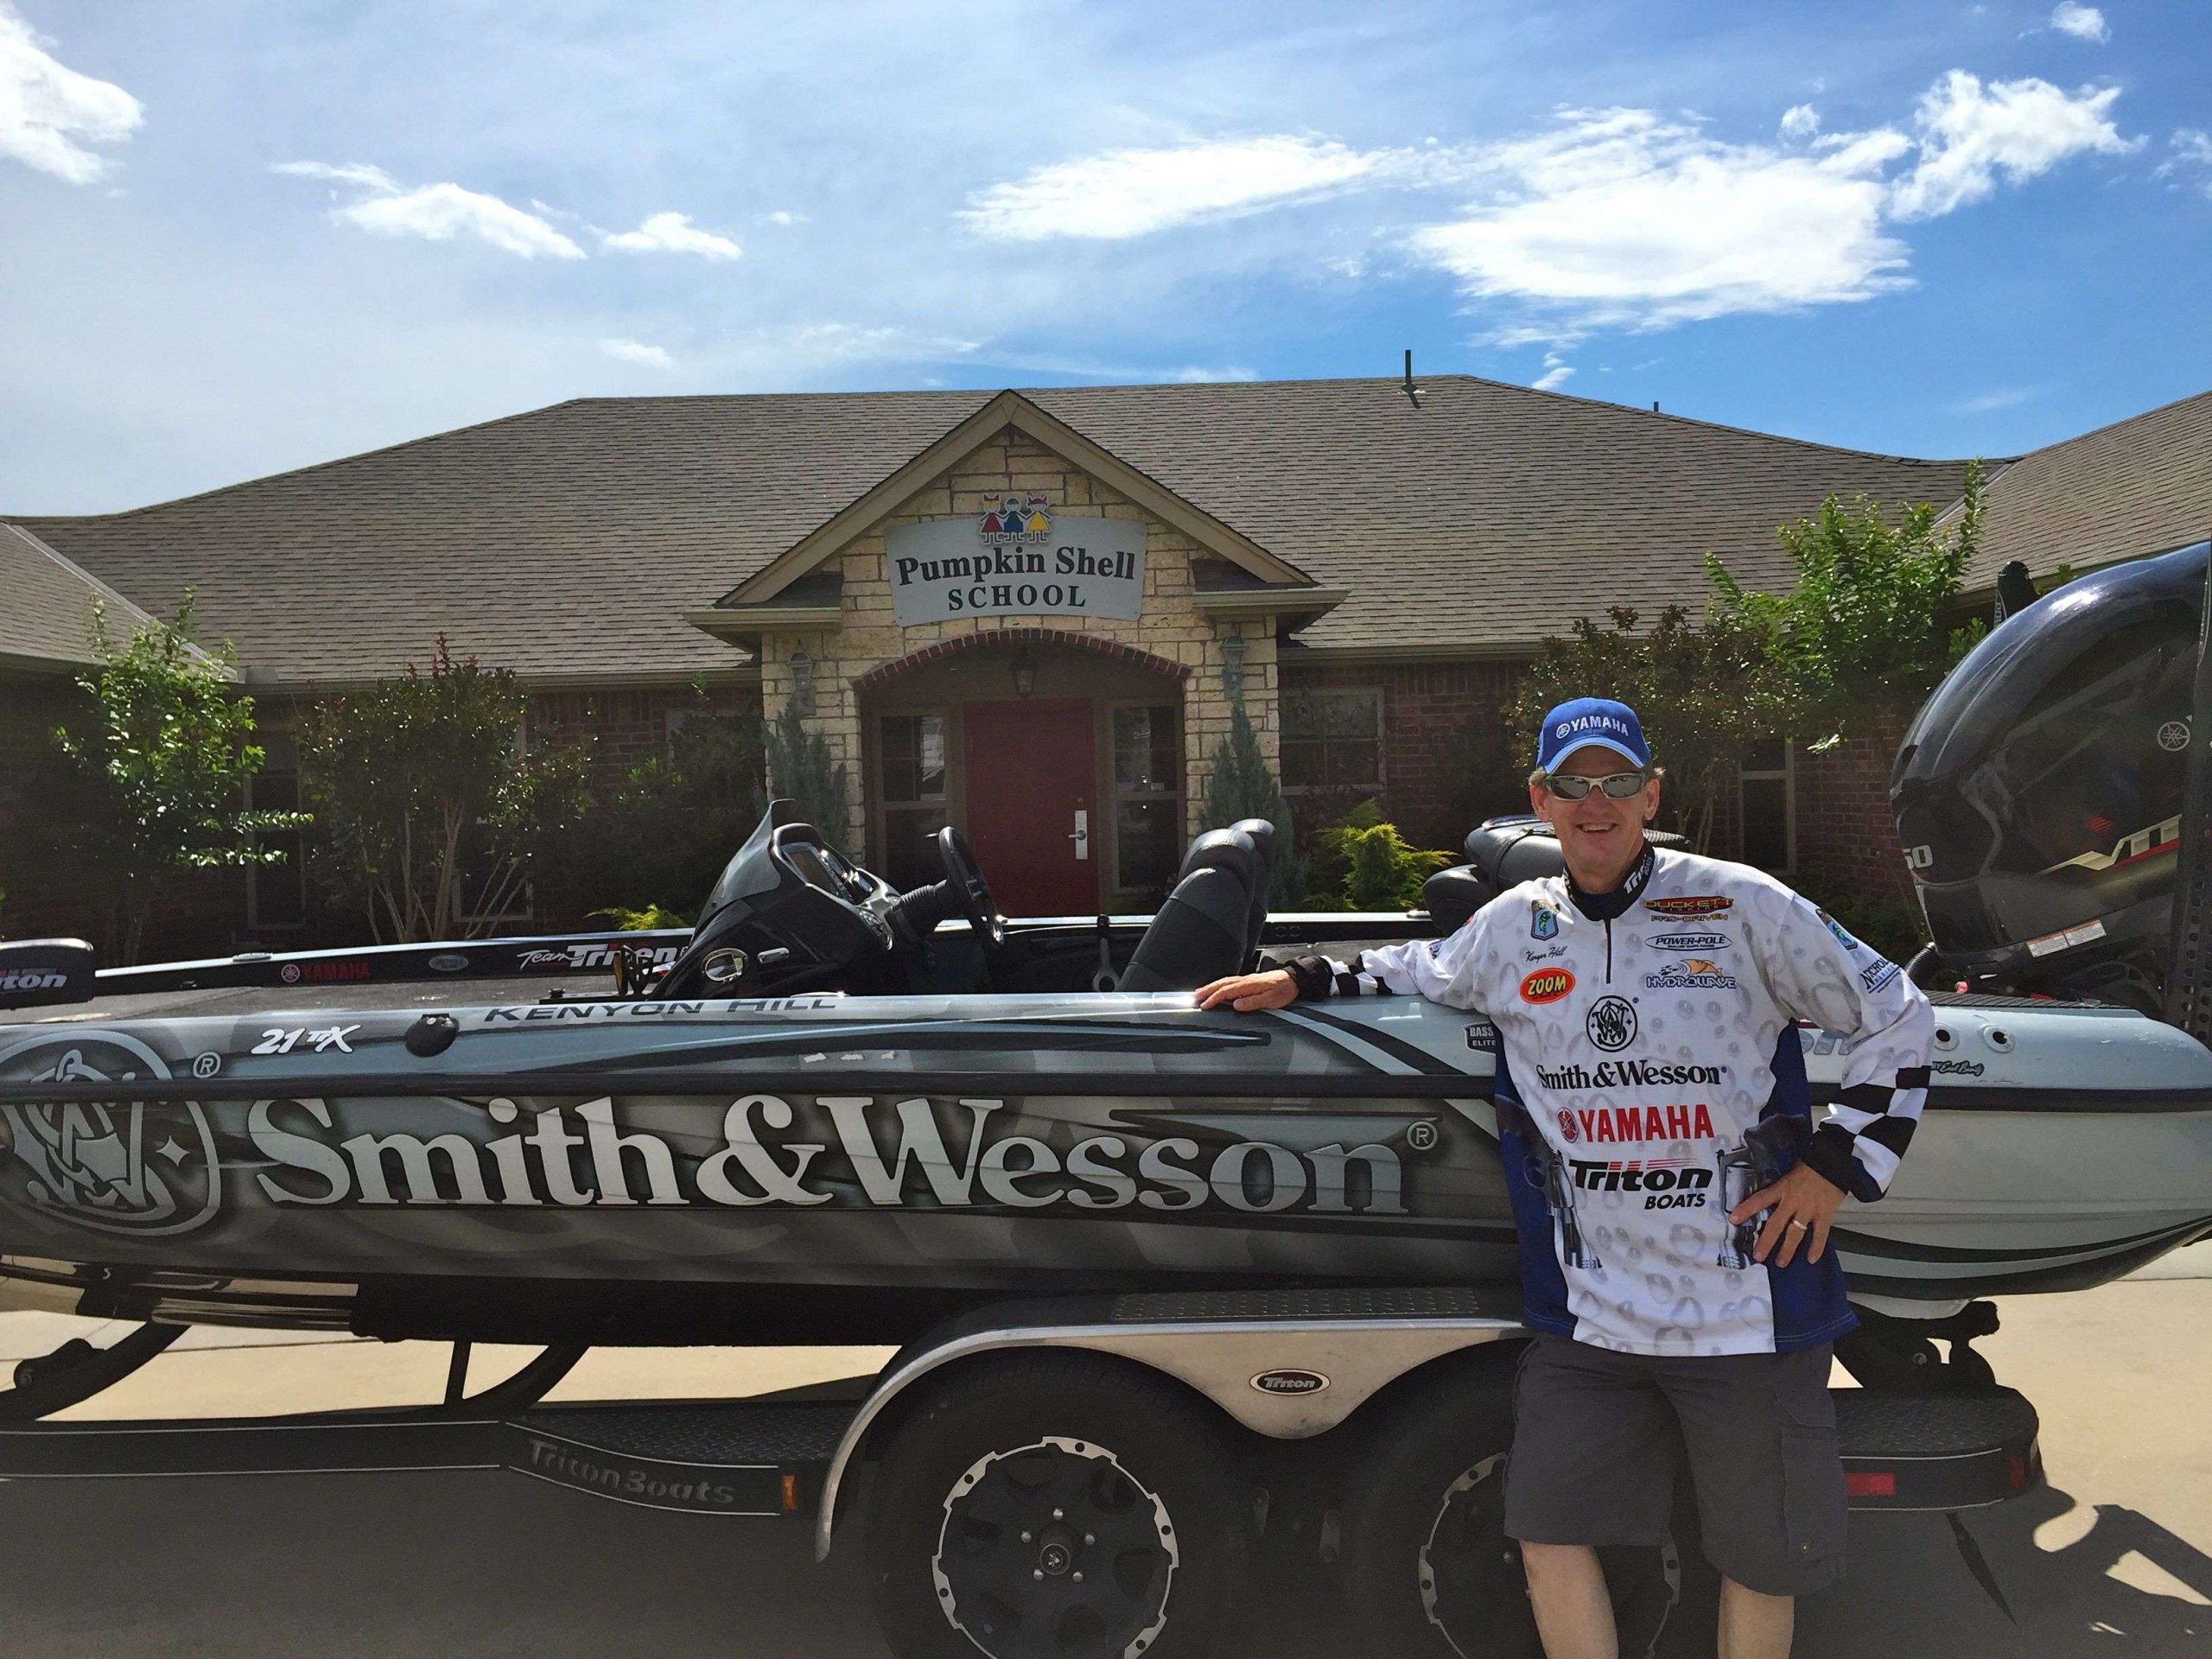 Bassmaster Elite Series pro Kenyon Hill visited Pumpkin Shell School in Norman, Okla., after he returned home from Zippo BASSfest presented by A.R.E. Truck Caps.